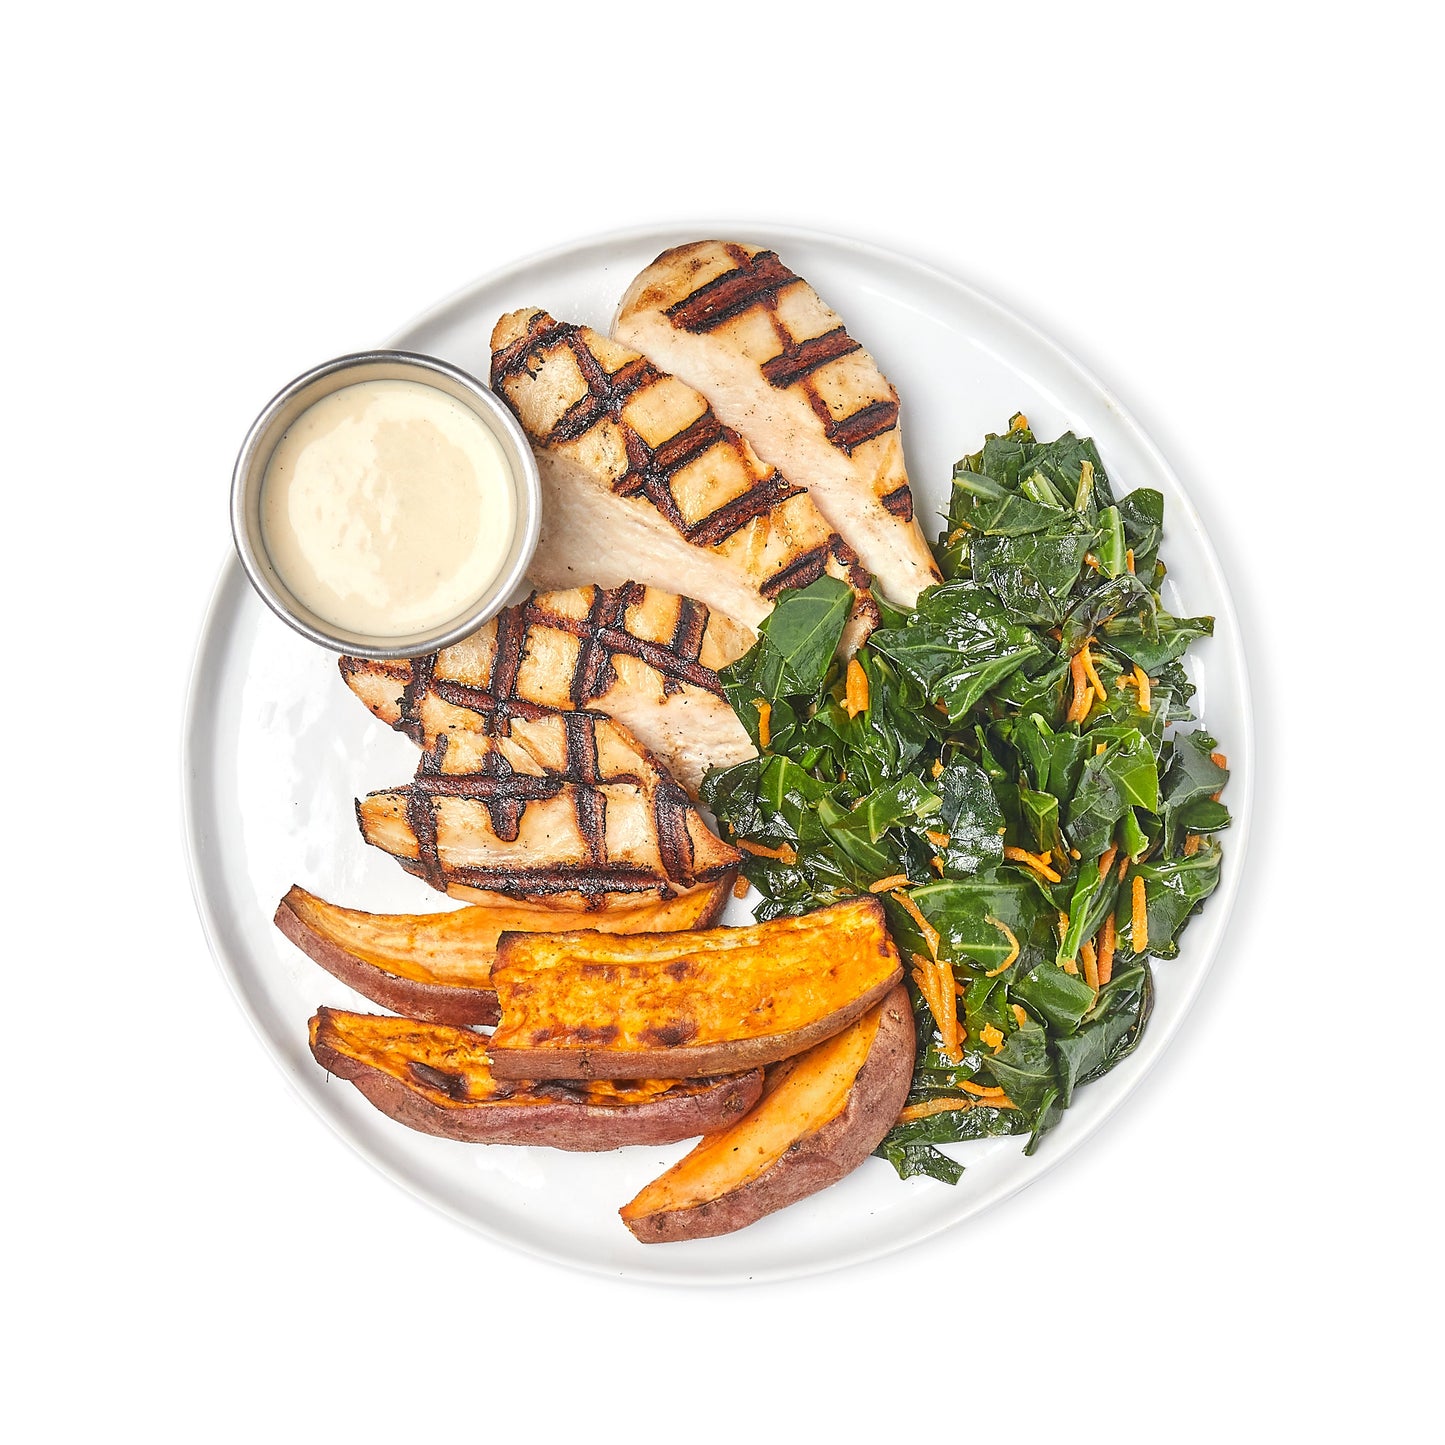 white bbq grilled chicken azuluna foods Premium Pasture-Raised ready-to-eat Meals Delivery